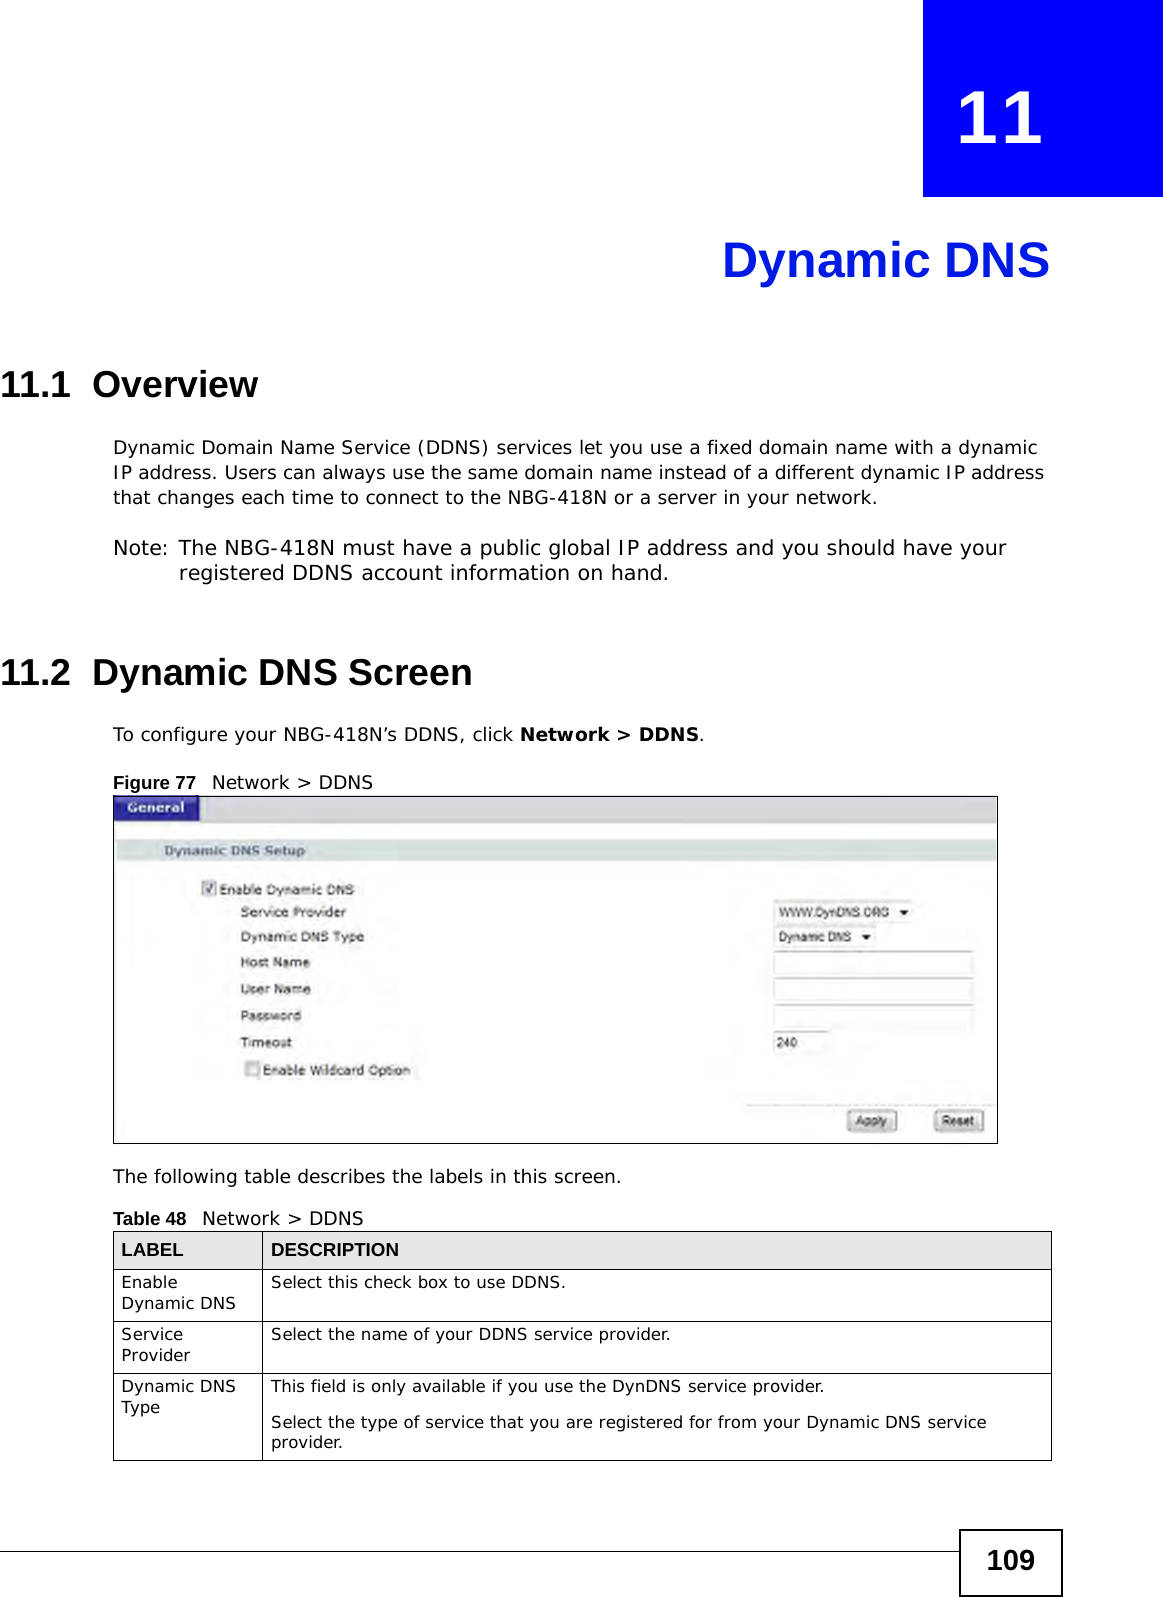 109CHAPTER   11Dynamic DNS11.1  Overview Dynamic Domain Name Service (DDNS) services let you use a fixed domain name with a dynamic IP address. Users can always use the same domain name instead of a different dynamic IP address that changes each time to connect to the NBG-418N or a server in your network.Note: The NBG-418N must have a public global IP address and you should have your registered DDNS account information on hand.11.2  Dynamic DNS Screen   To configure your NBG-418N’s DDNS, click Network &gt; DDNS.Figure 77   Network &gt; DDNSThe following table describes the labels in this screen.Table 48   Network &gt; DDNSLABEL DESCRIPTIONEnable Dynamic DNS Select this check box to use DDNS.Service Provider Select the name of your DDNS service provider. Dynamic DNS Type  This field is only available if you use the DynDNS service provider. Select the type of service that you are registered for from your Dynamic DNS service provider.